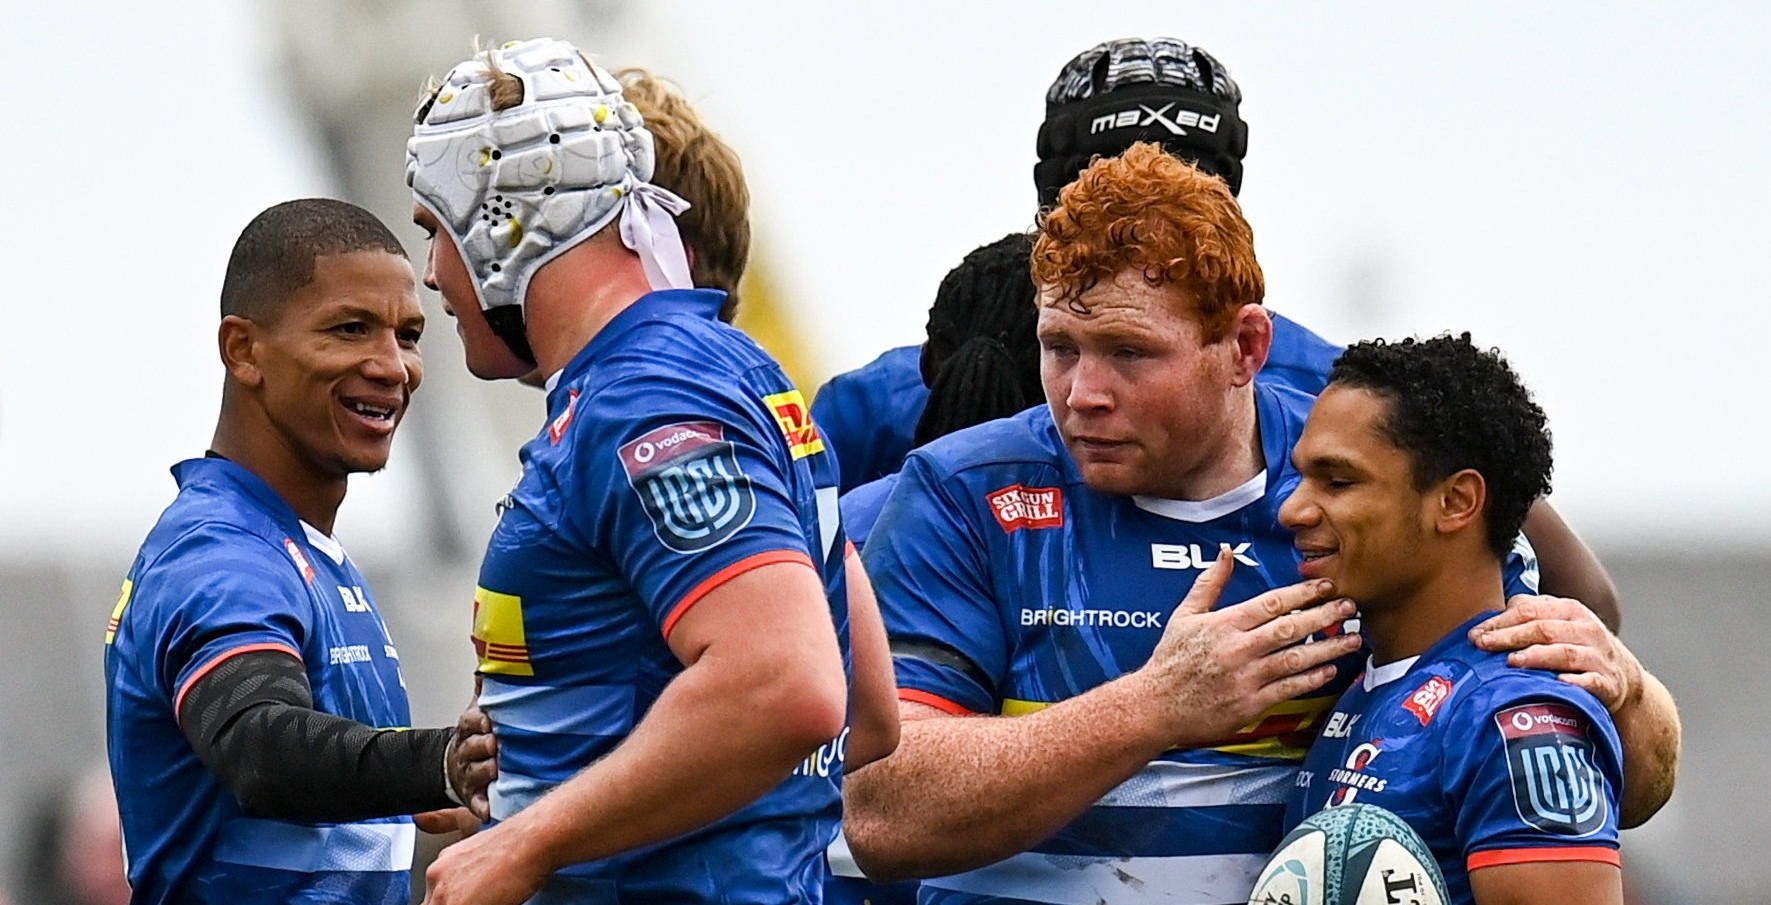 Galway , Ireland - 26 February 2022; Herschel Jantjies, right, and Steven Kitshoff of DHL Stormers celebrate a penalty scrum during the United Rugby Championship match between Connacht and DHL Stormers at The Sportsground in Galway. (Photo By Harry Murphy/Sportsfile via Getty Images)